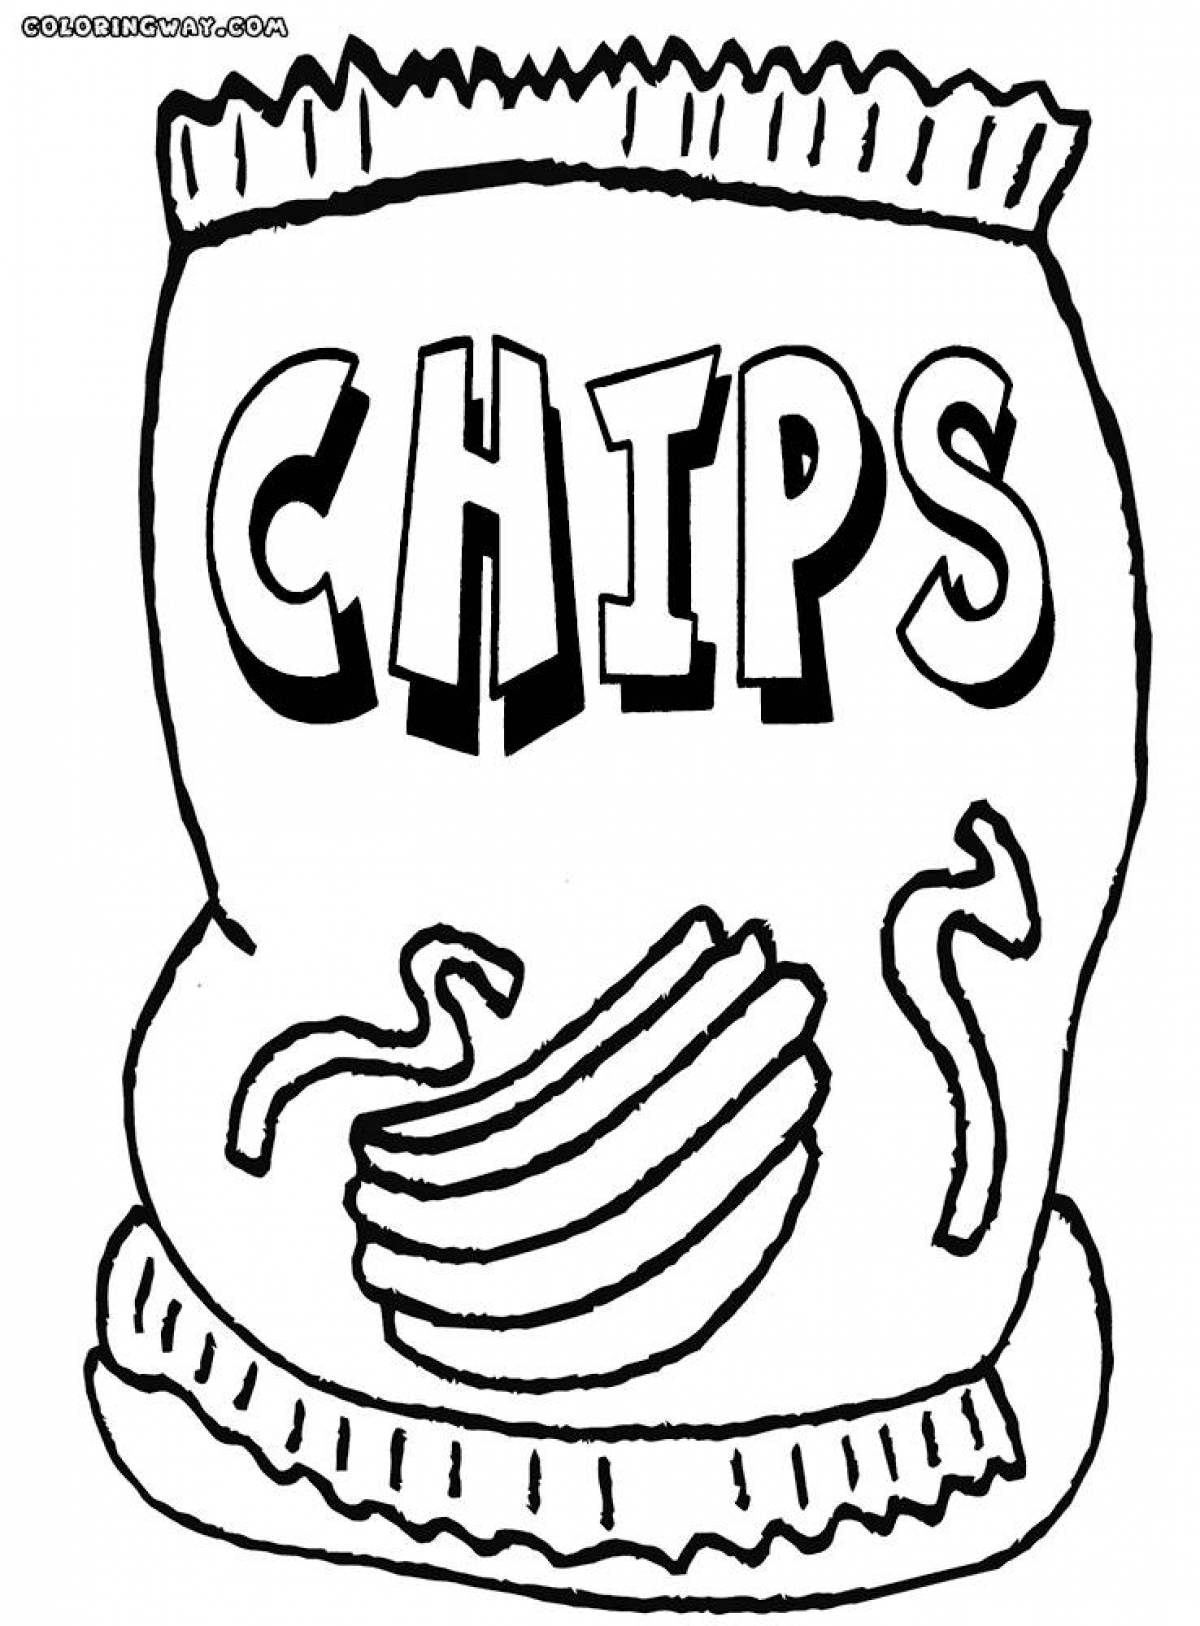 Coloring funny chips